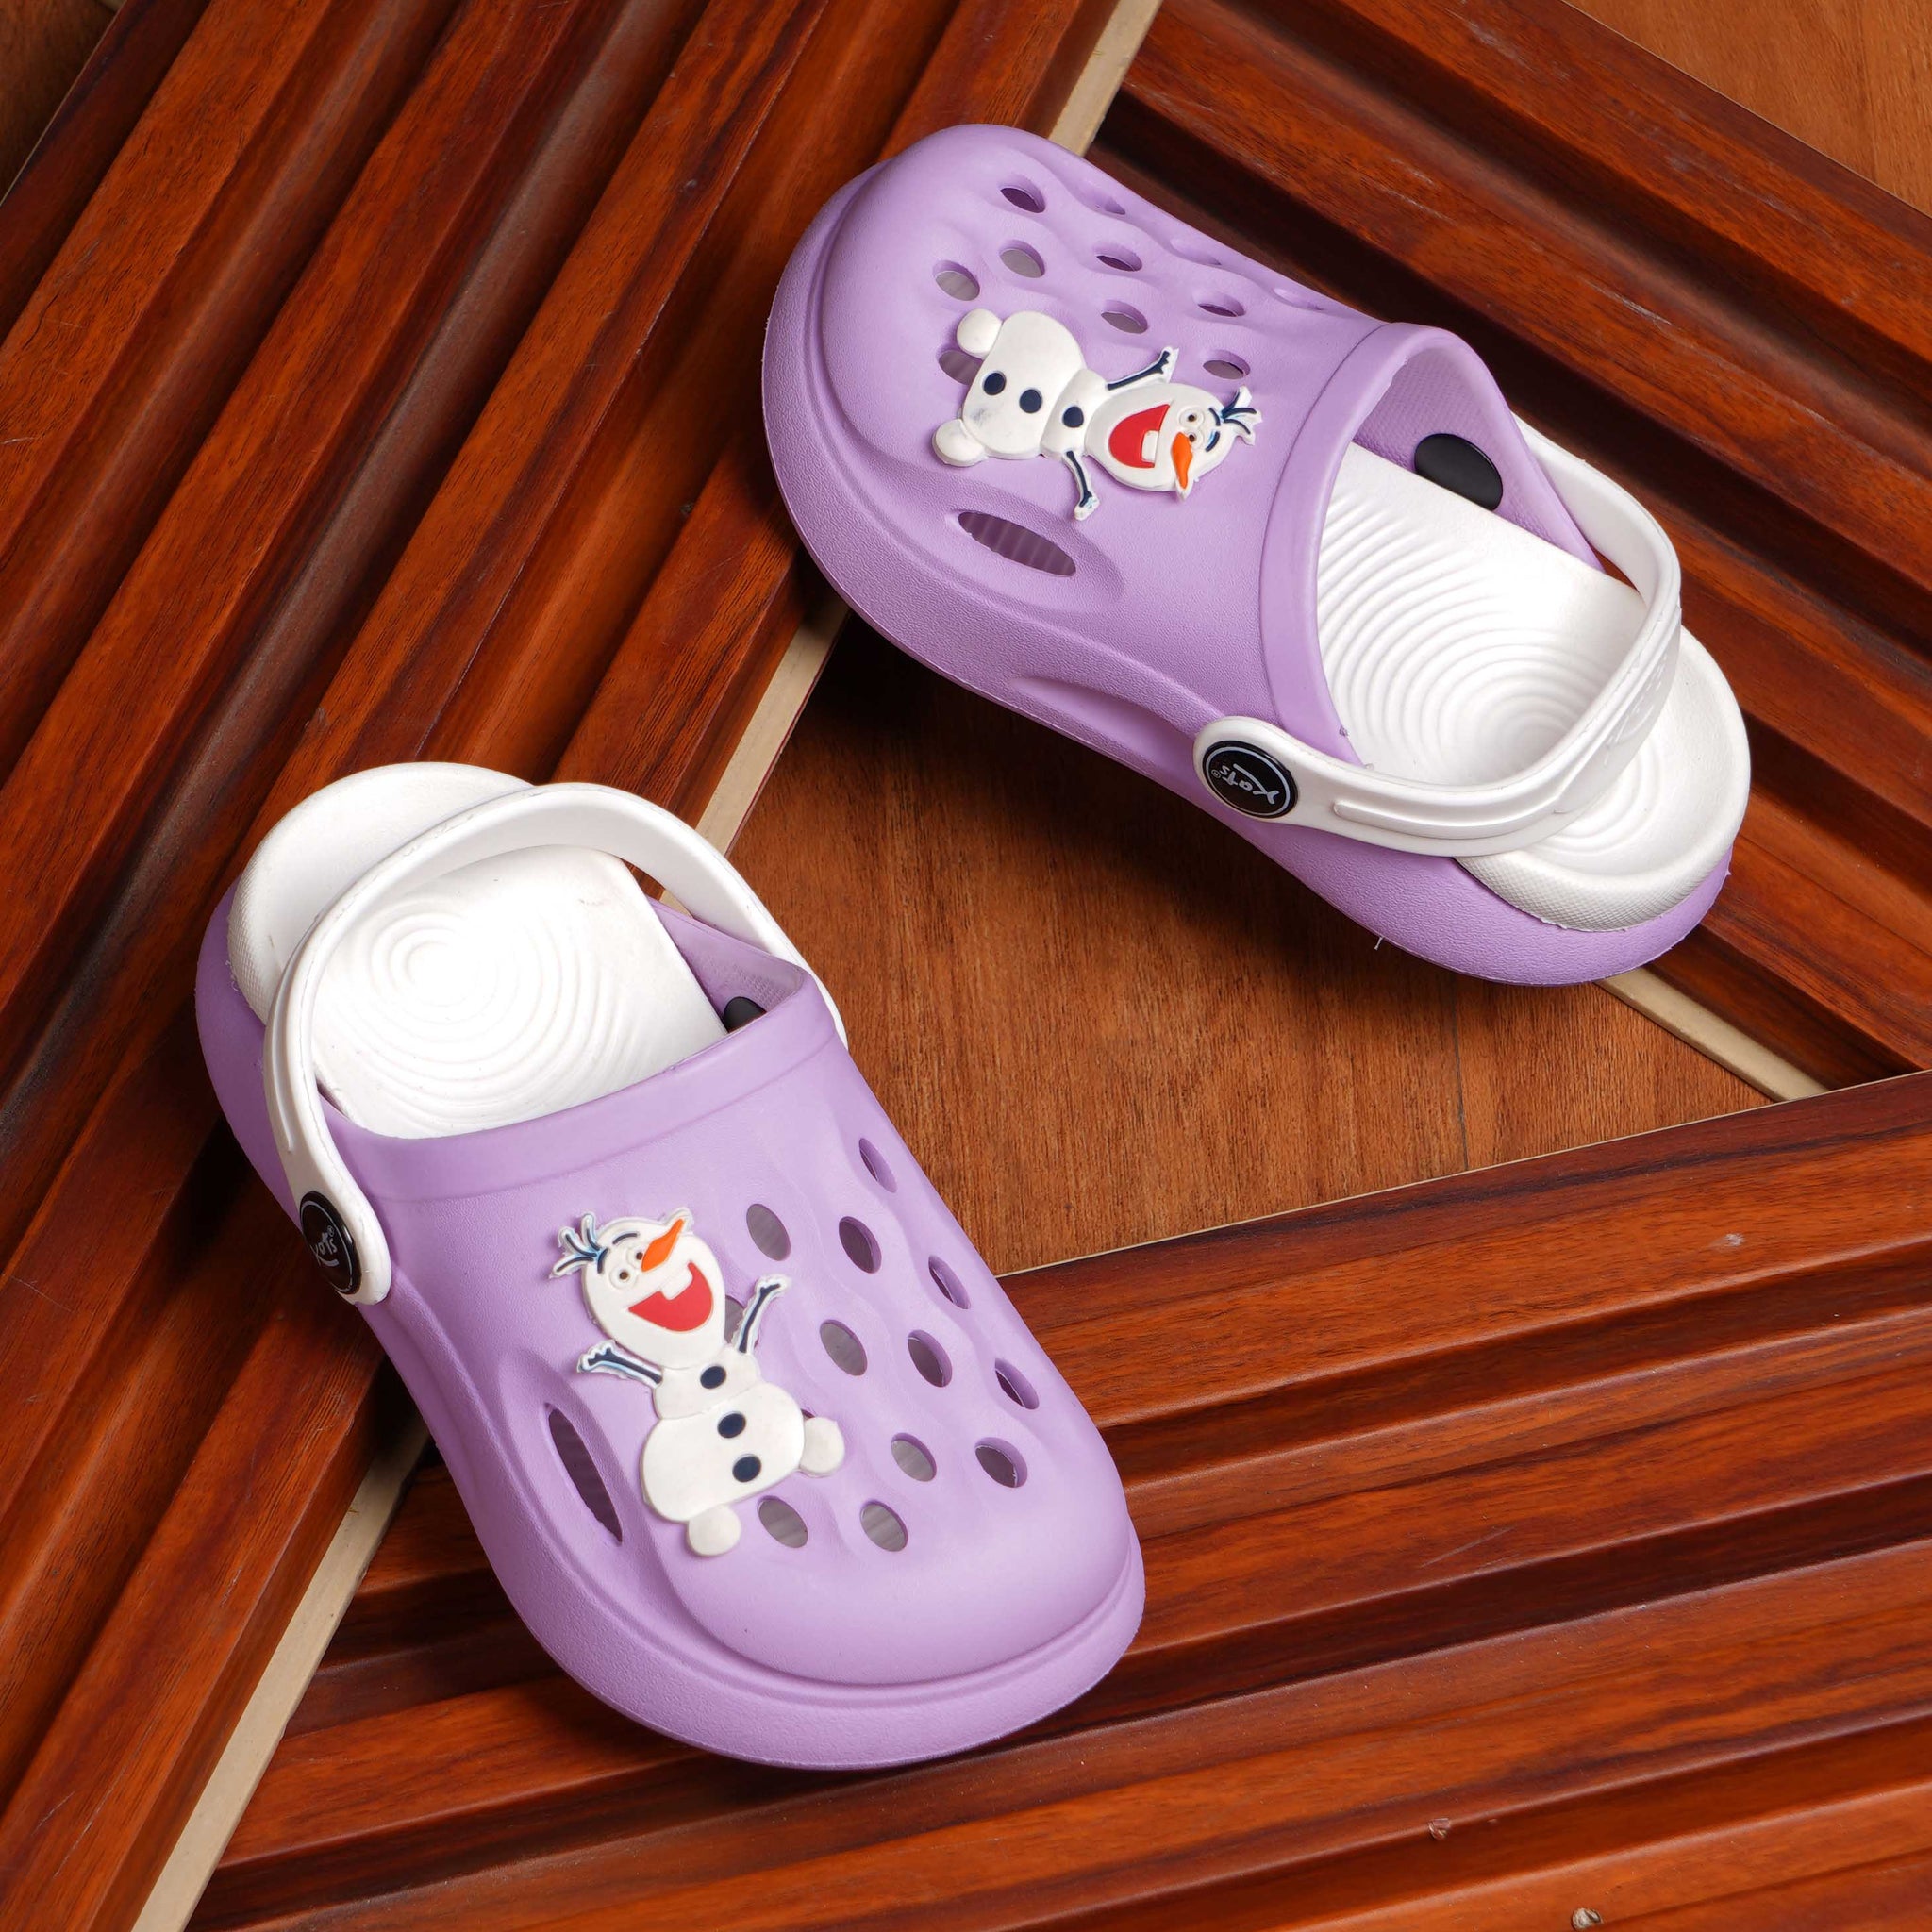 Slingback Clog for Boys & Girls | Indoor & Outdoor Clogs for Kids with Cartoon Charm Purple-White